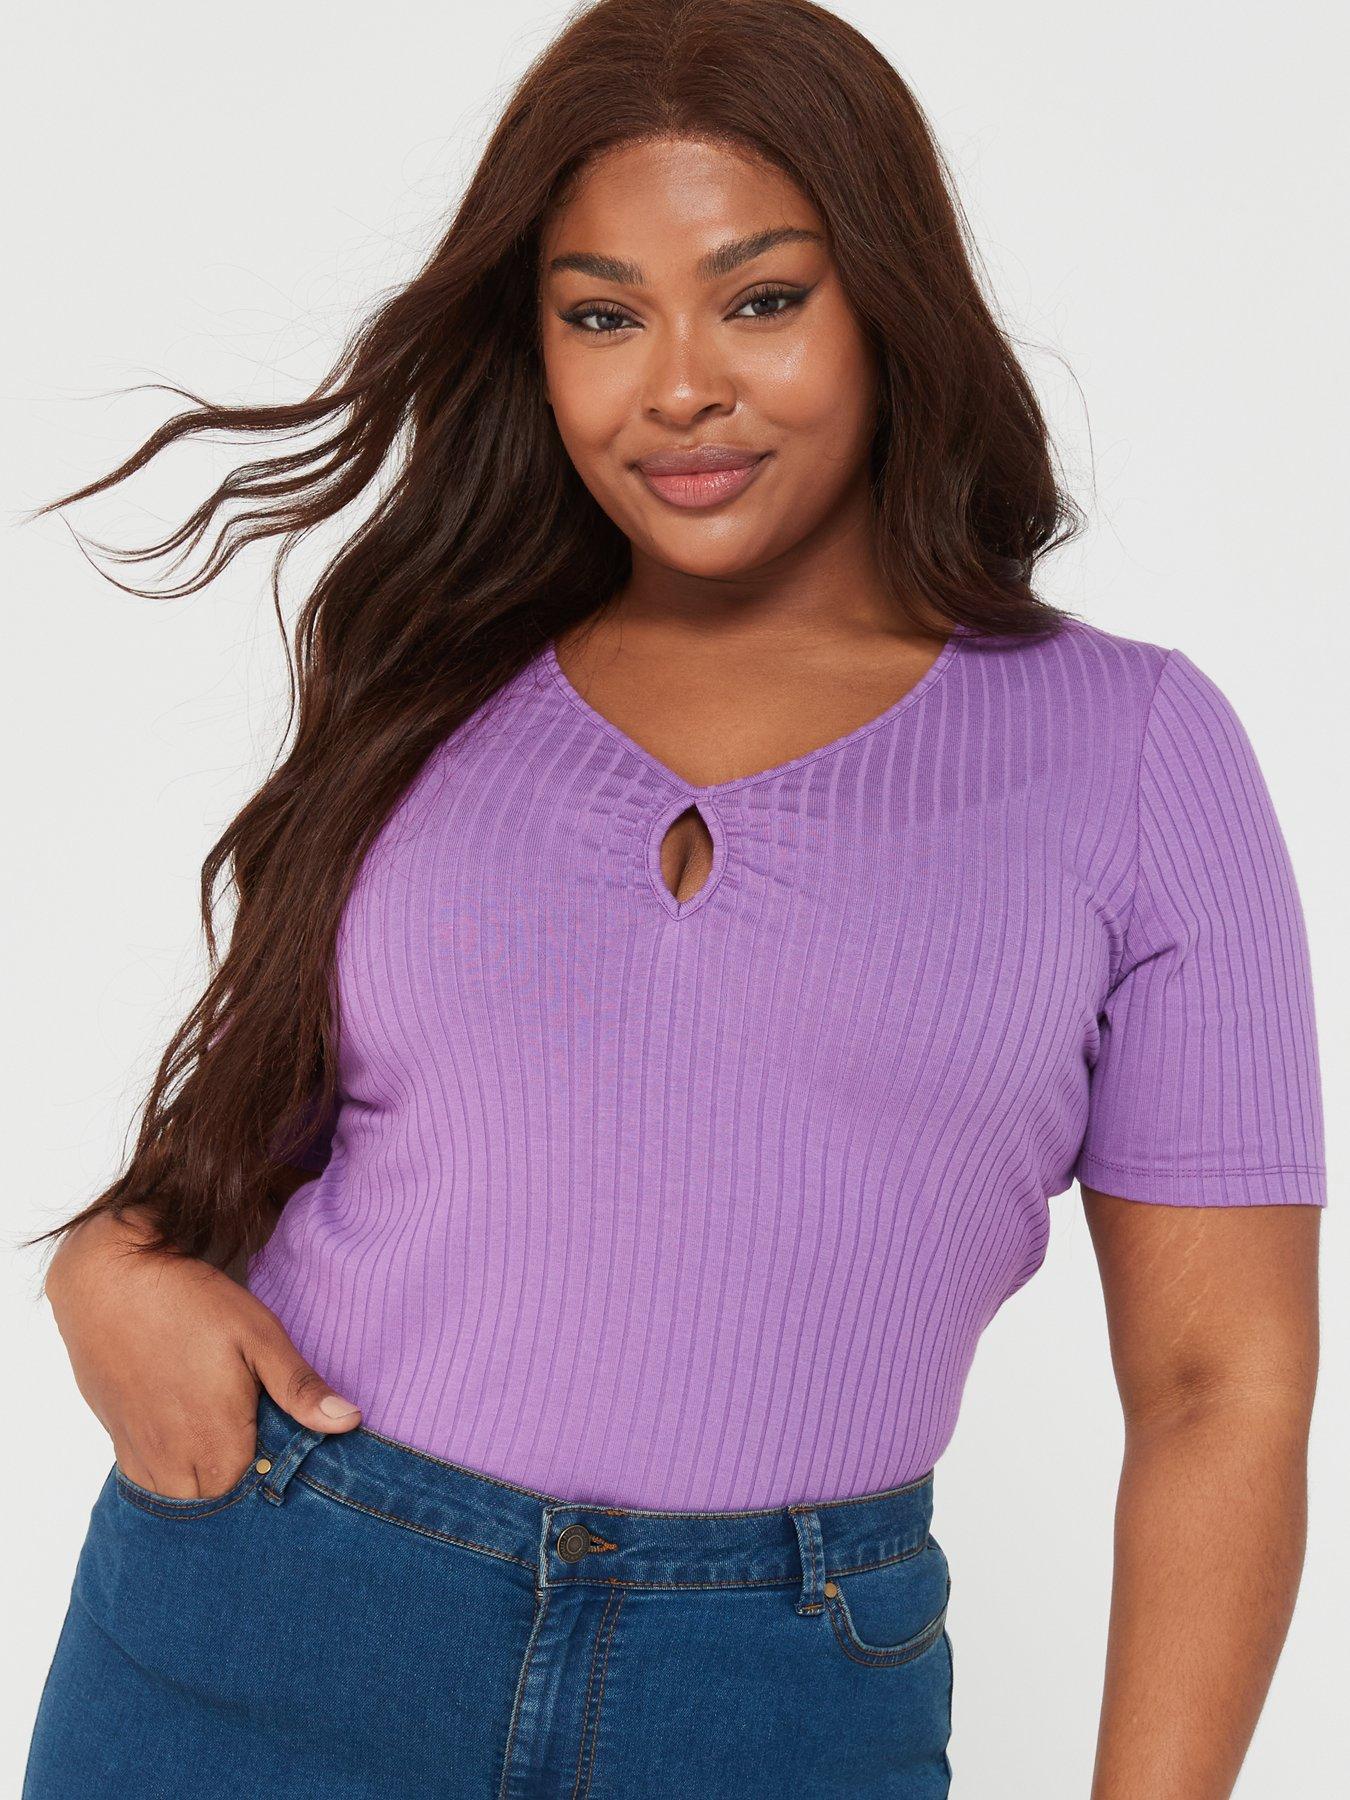 Plus Size Tops | Plus Size Evening Tops for Women |